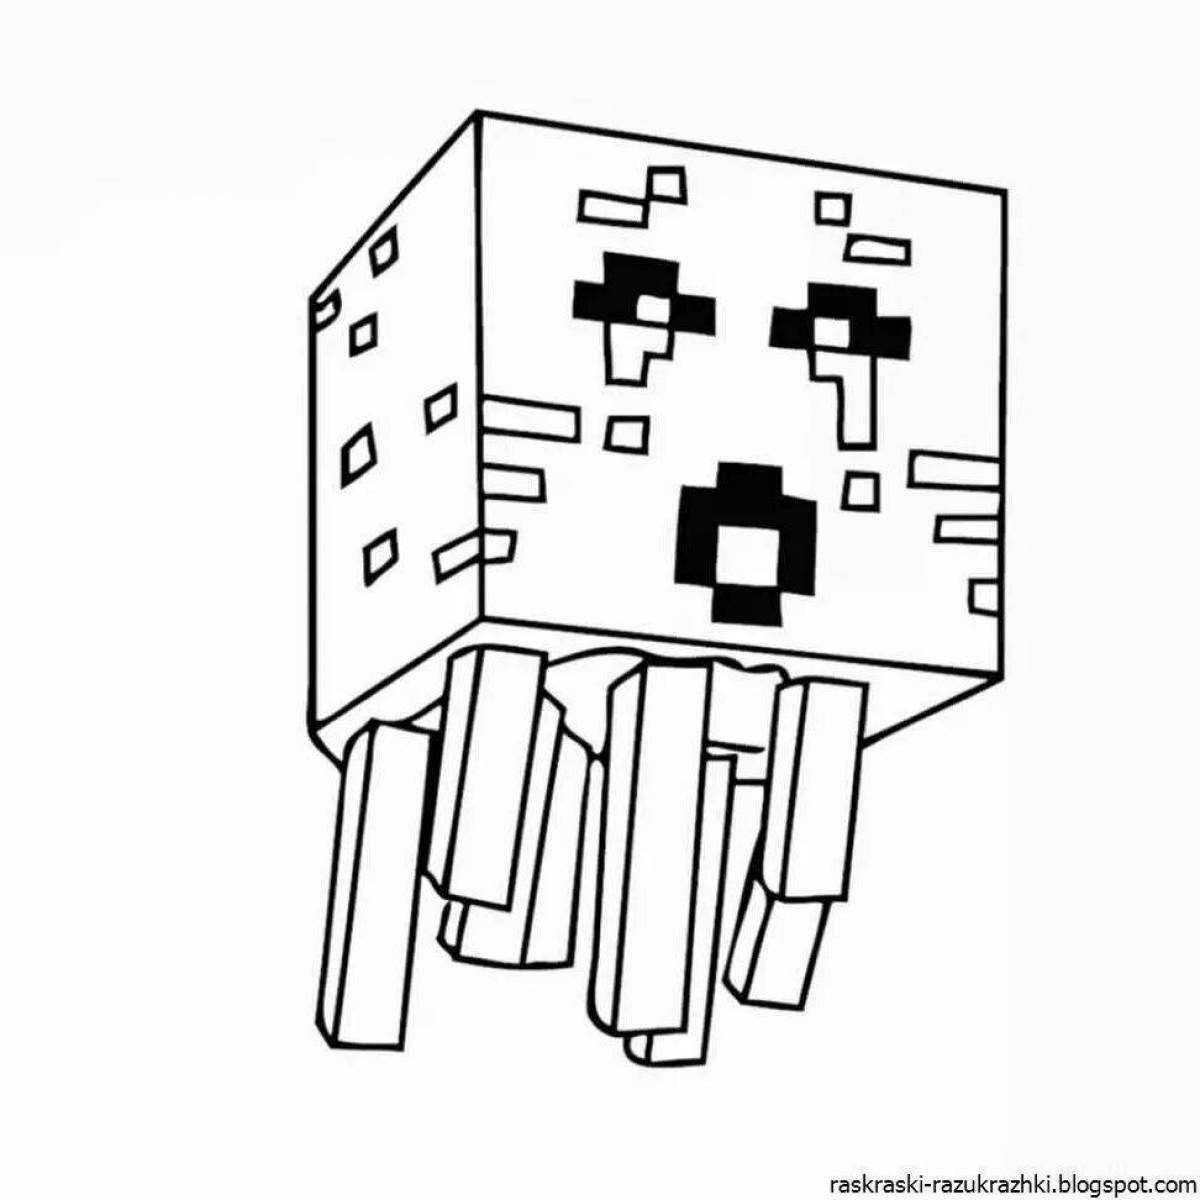 Adorable minecraft dots coloring page